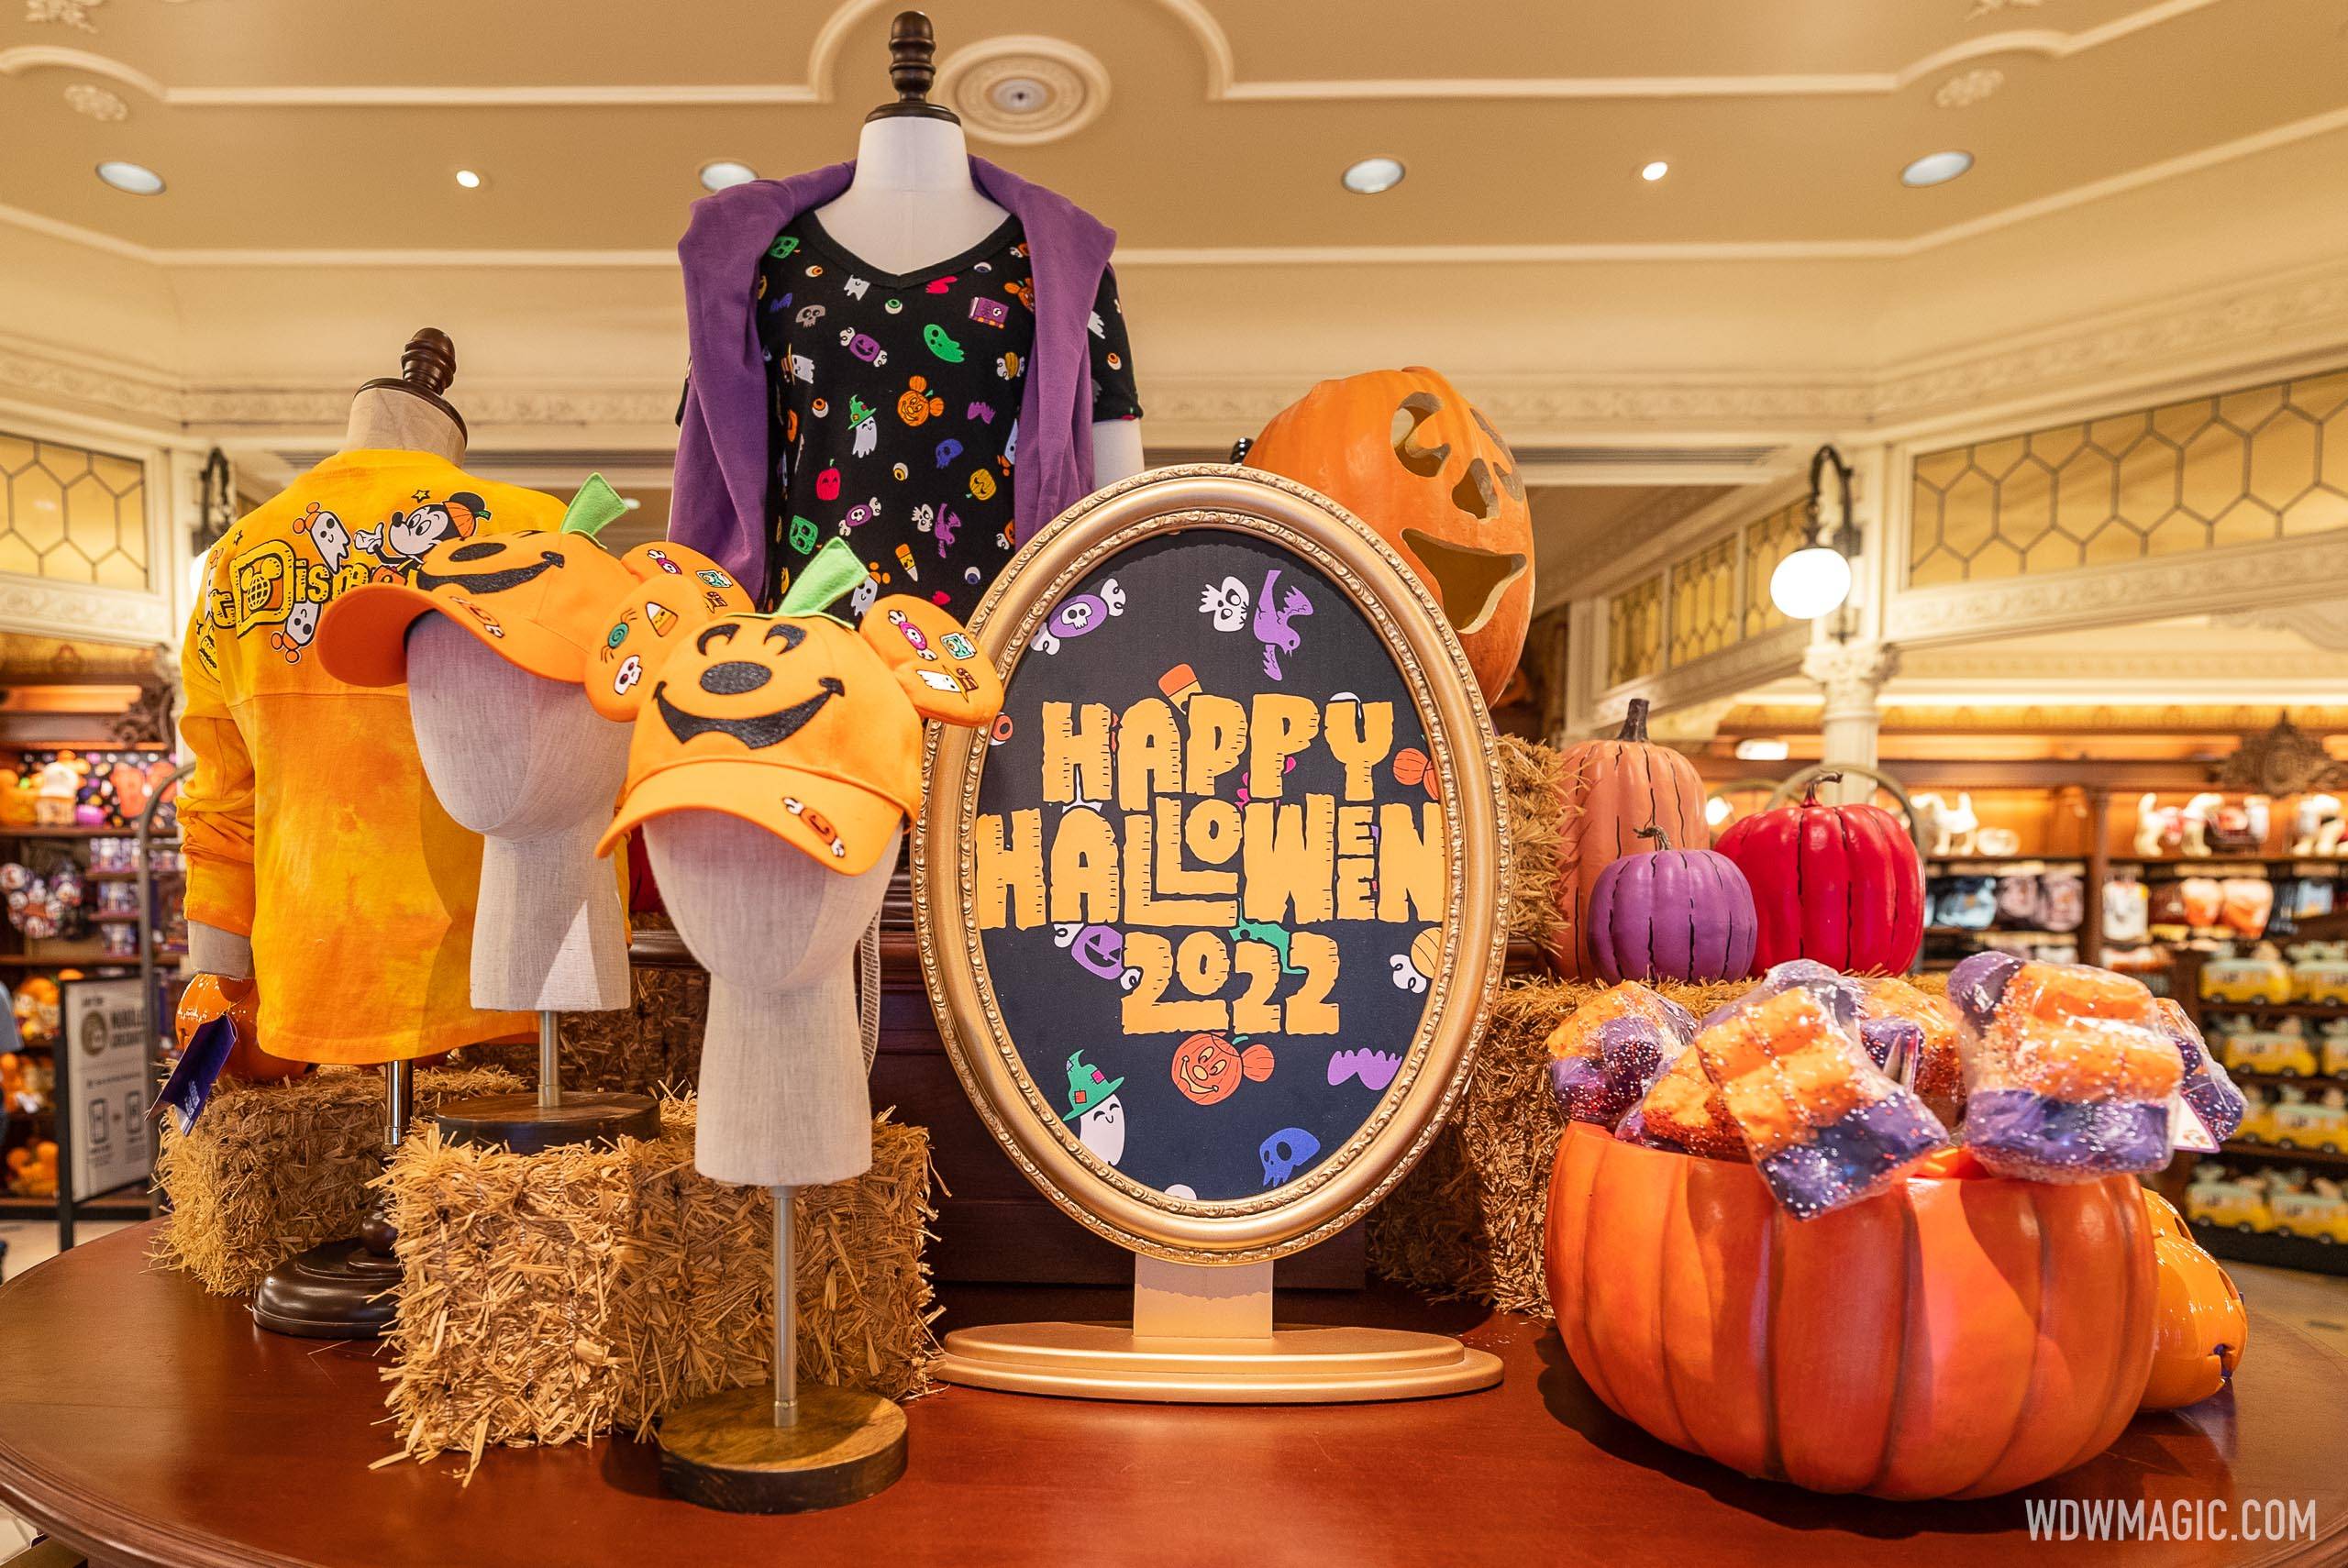 Disney's Halloween merchandise will be available at 30% discount for Passholders